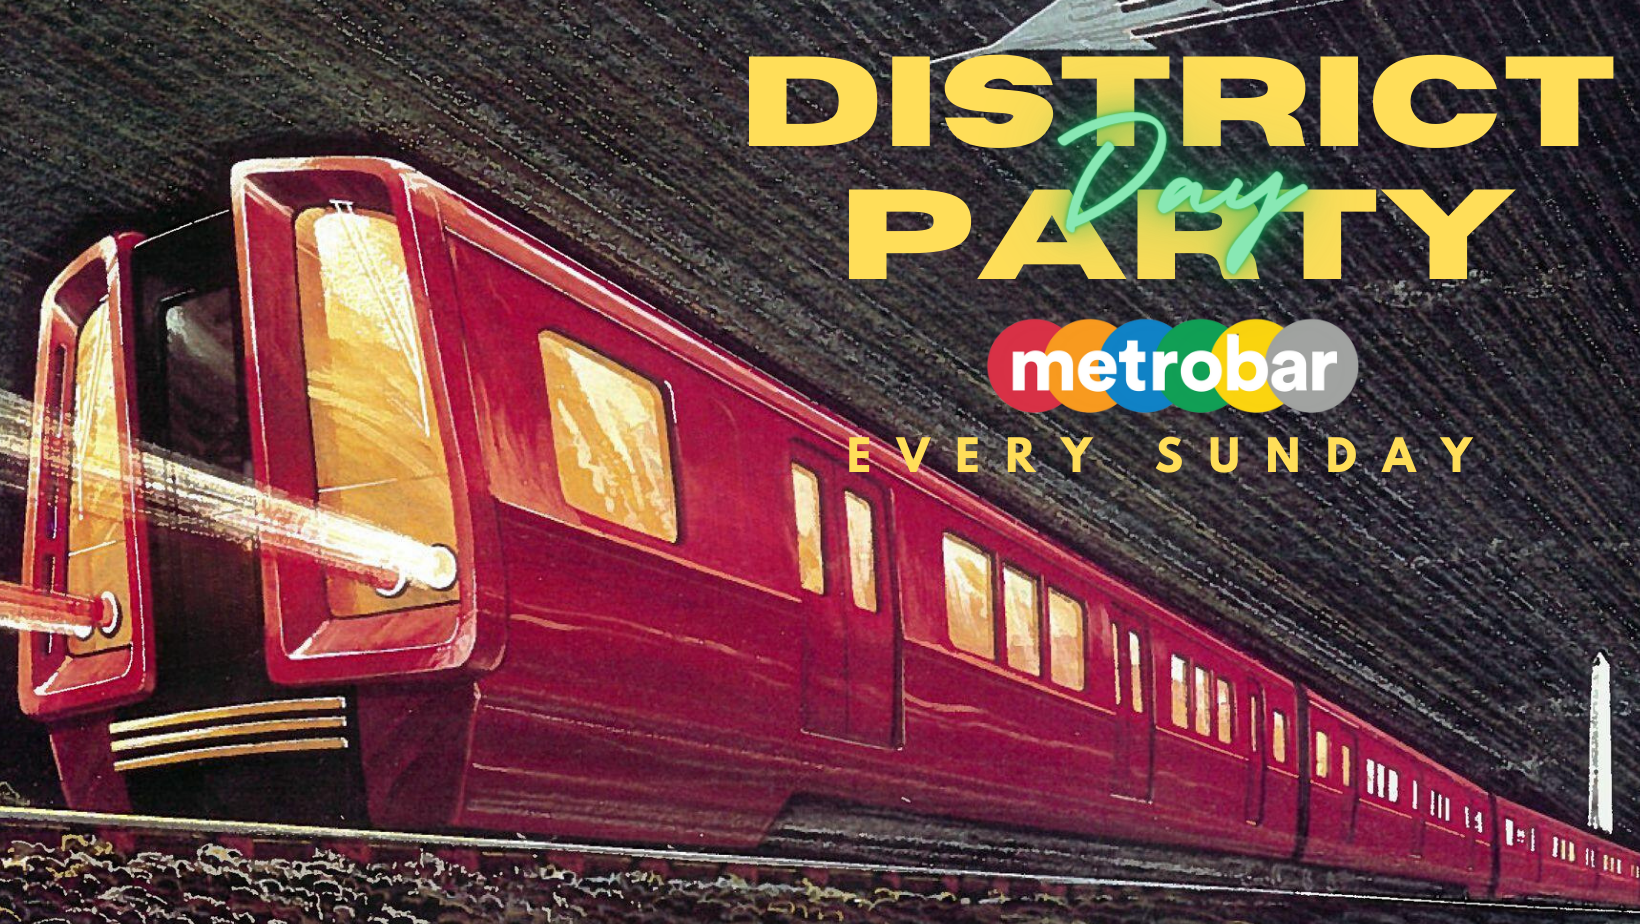 District Day Party: Sunday DJs on the Train